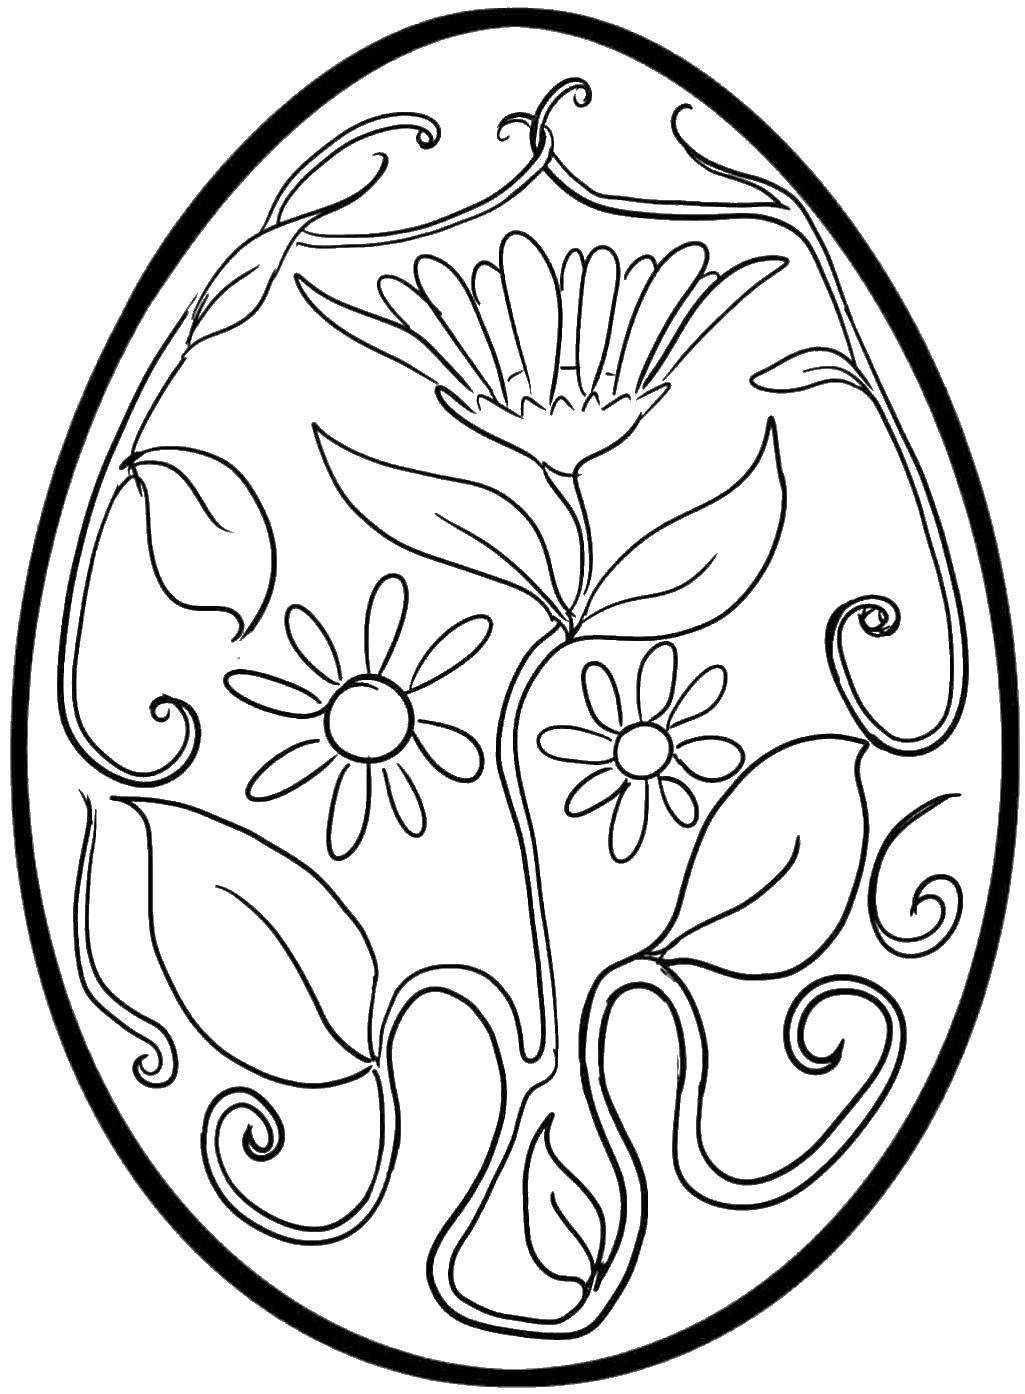 Coloring Egg with flower. Category Patterns for coloring eggs. Tags:  egg patterns, flowers.